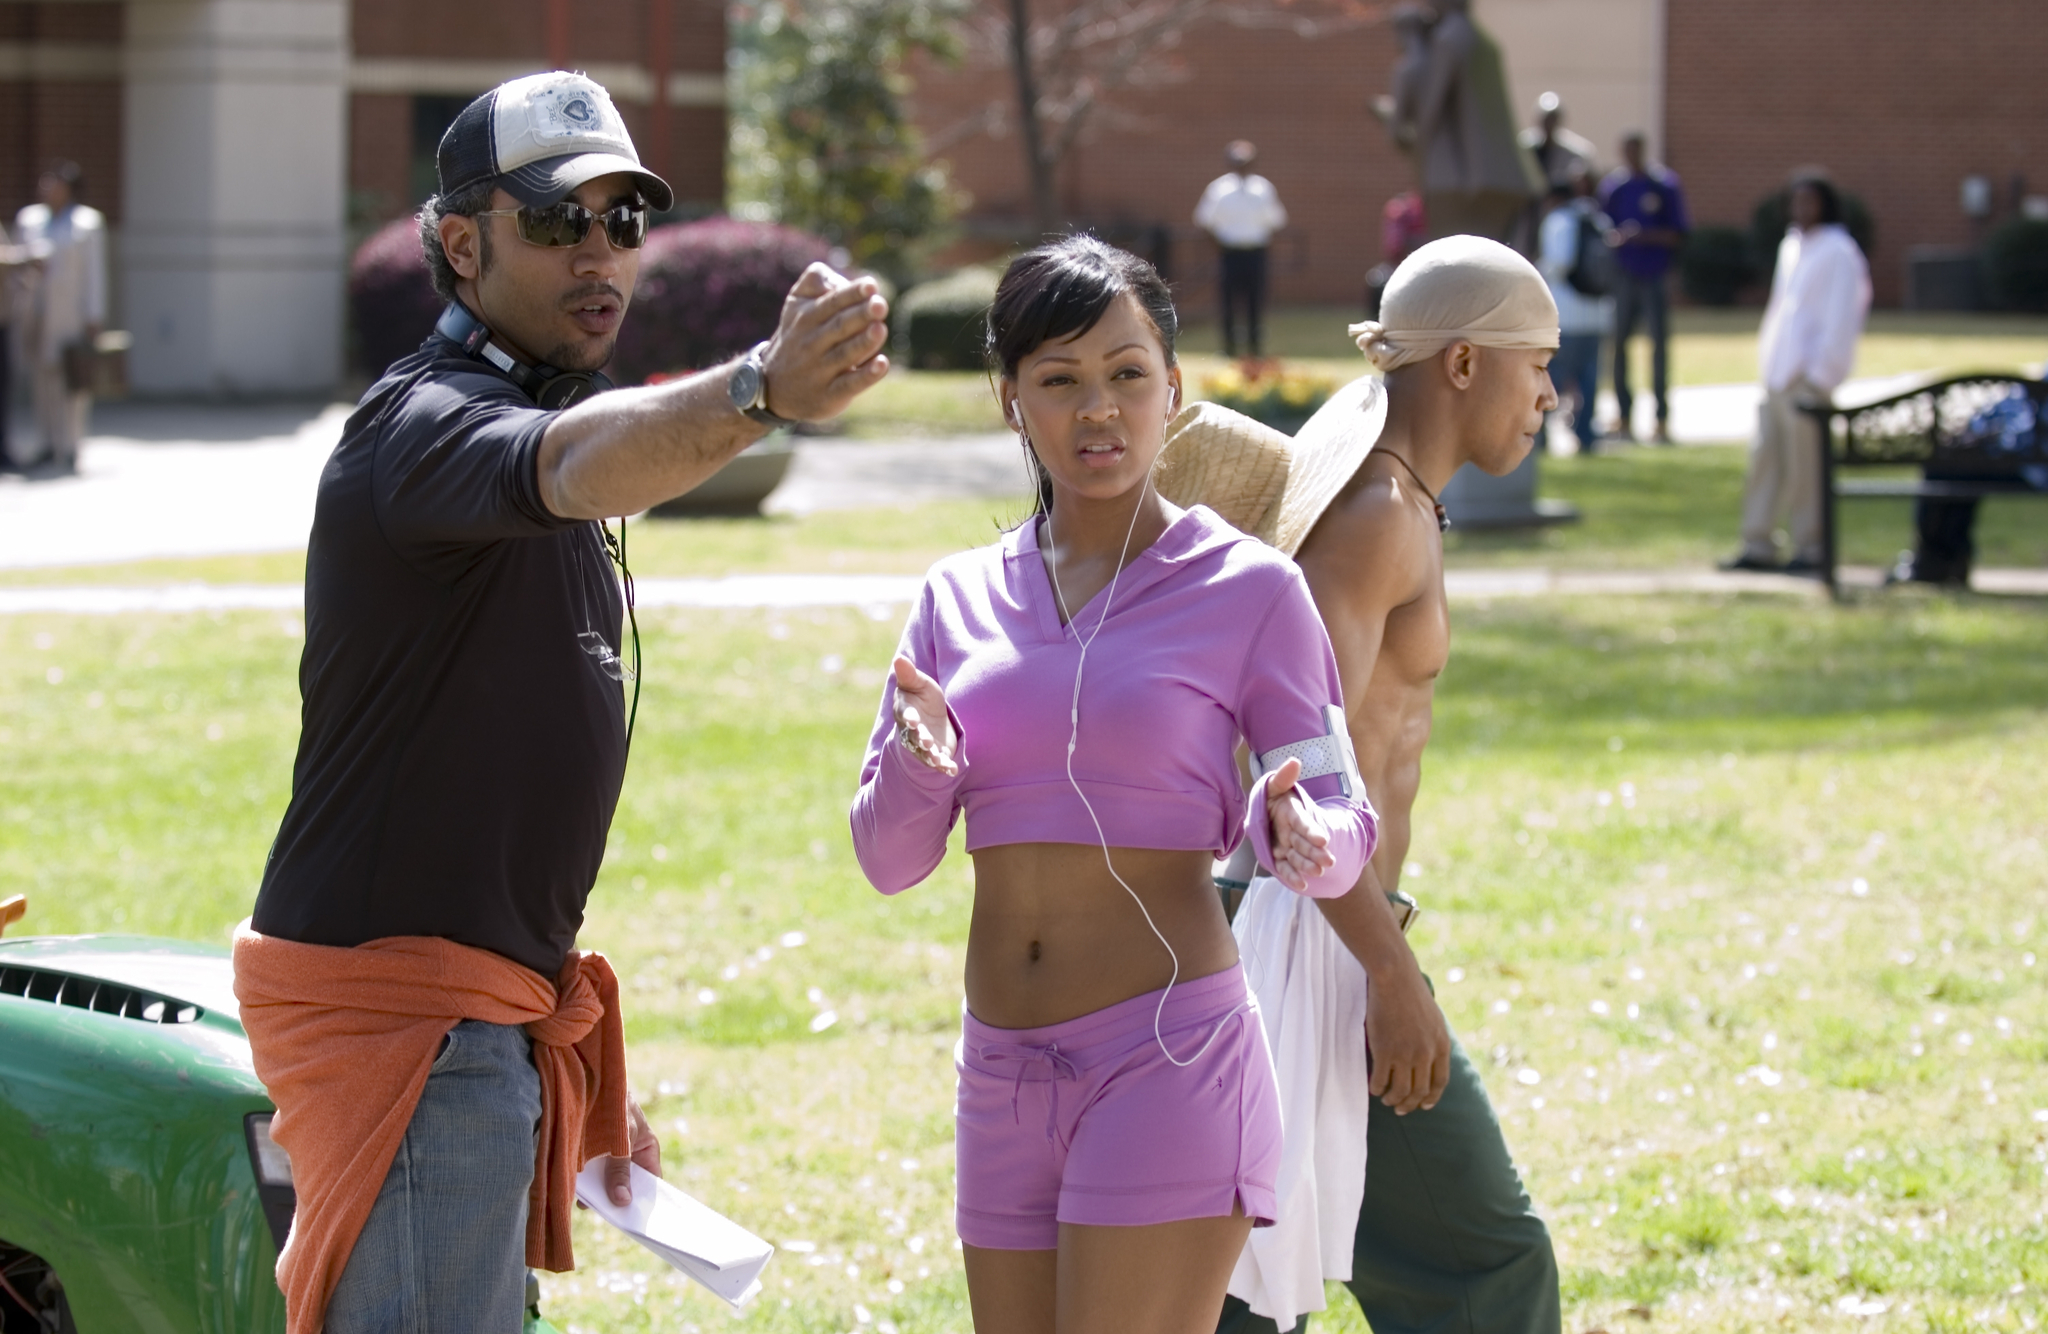 Still of Meagan Good, Sylvain White and Columbus Short in Stomp the Yard (2007)